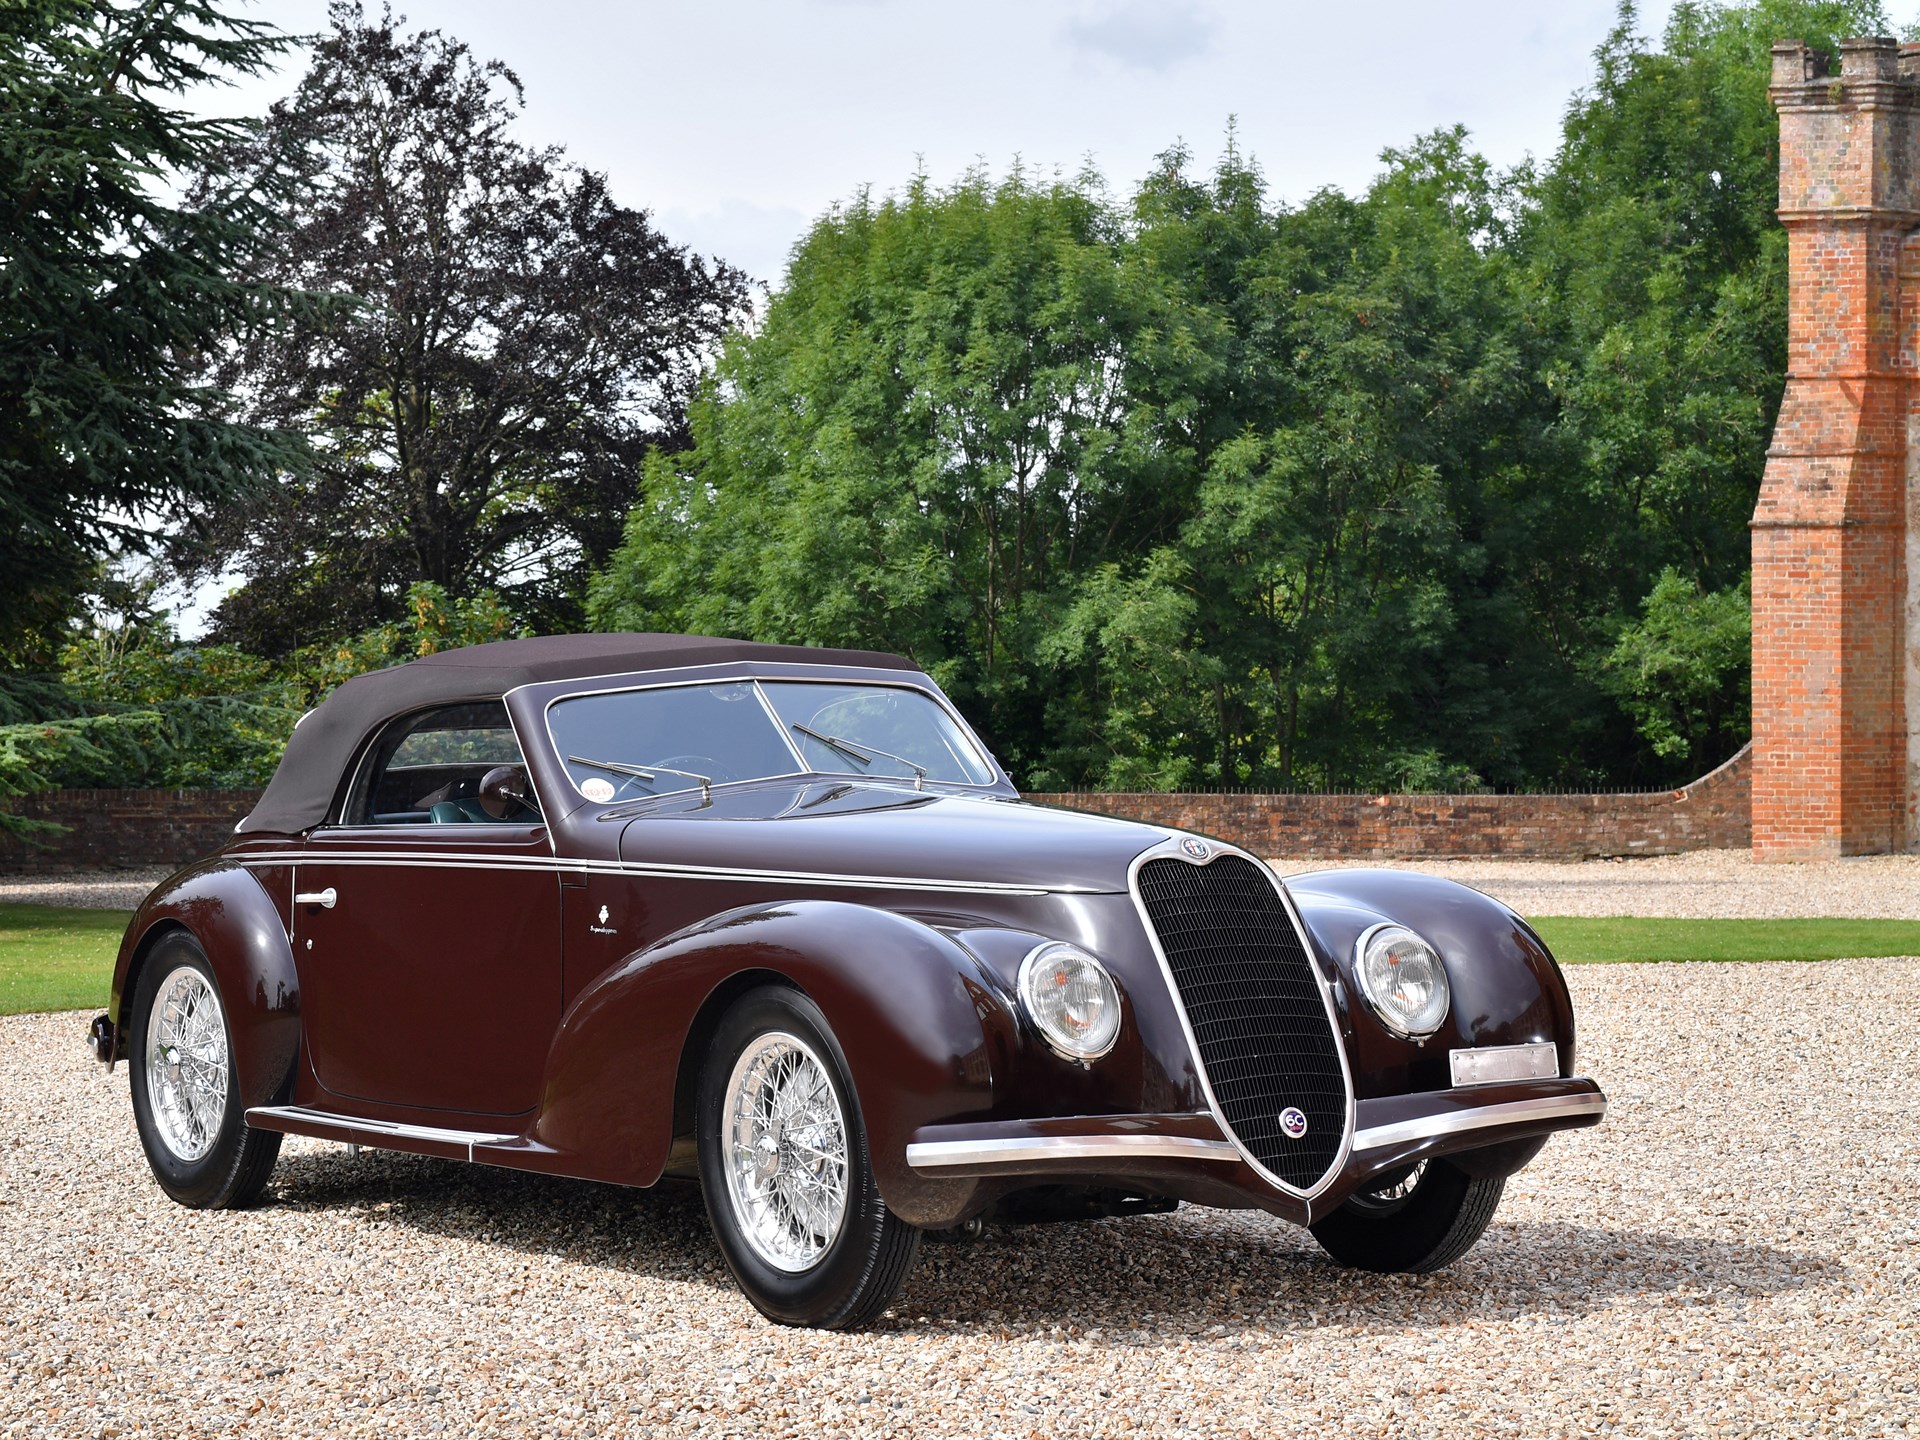 RM Sotheby's - 1939 Alfa Romeo 6C 2500 Sport Cabriolet by Touring